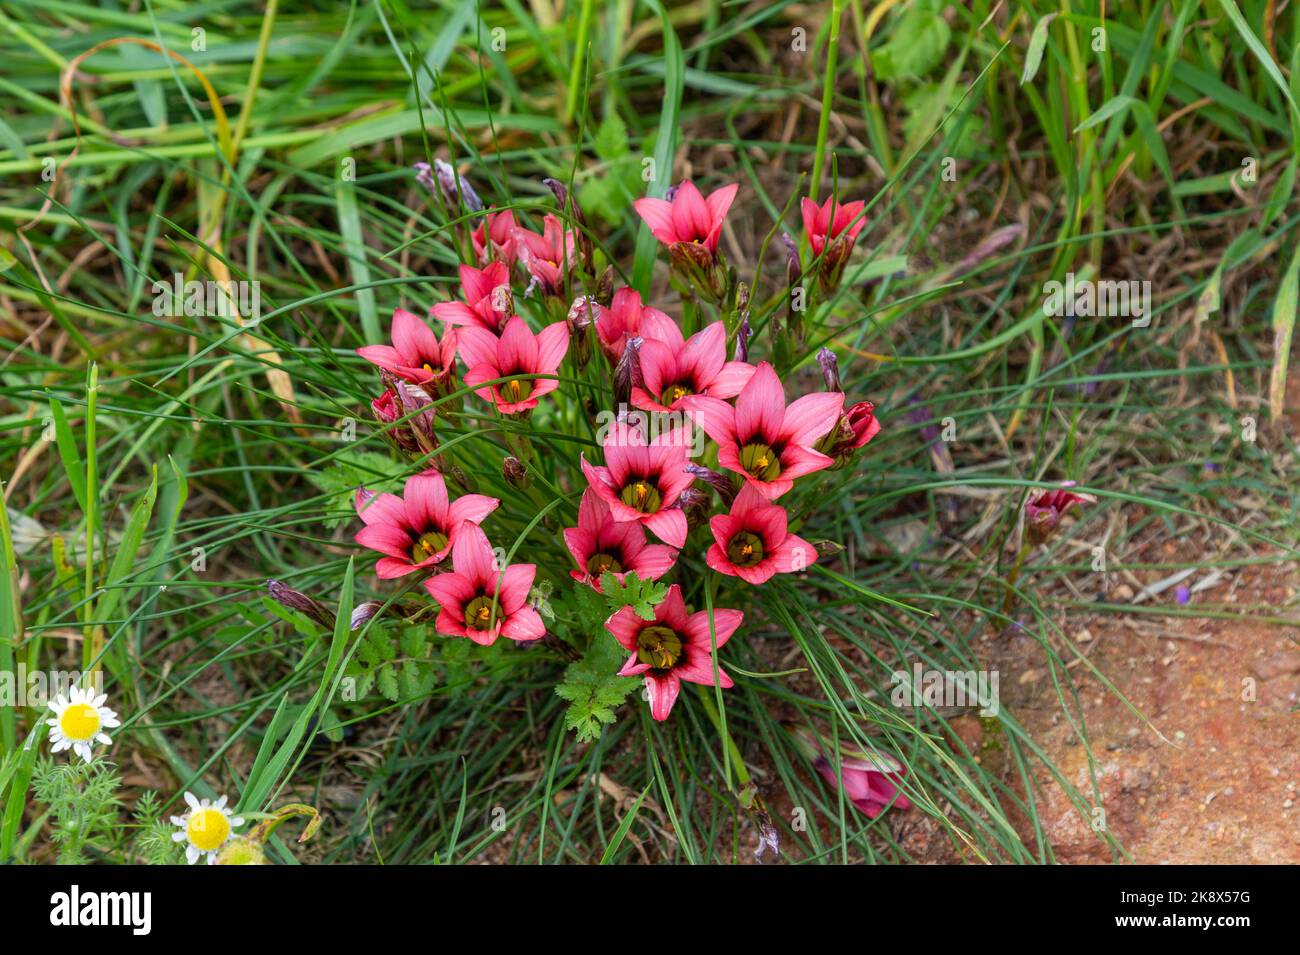 Some fowers of Romulea sp. seen in the town of Darling in the Western Cape of South Africa Stock Photo